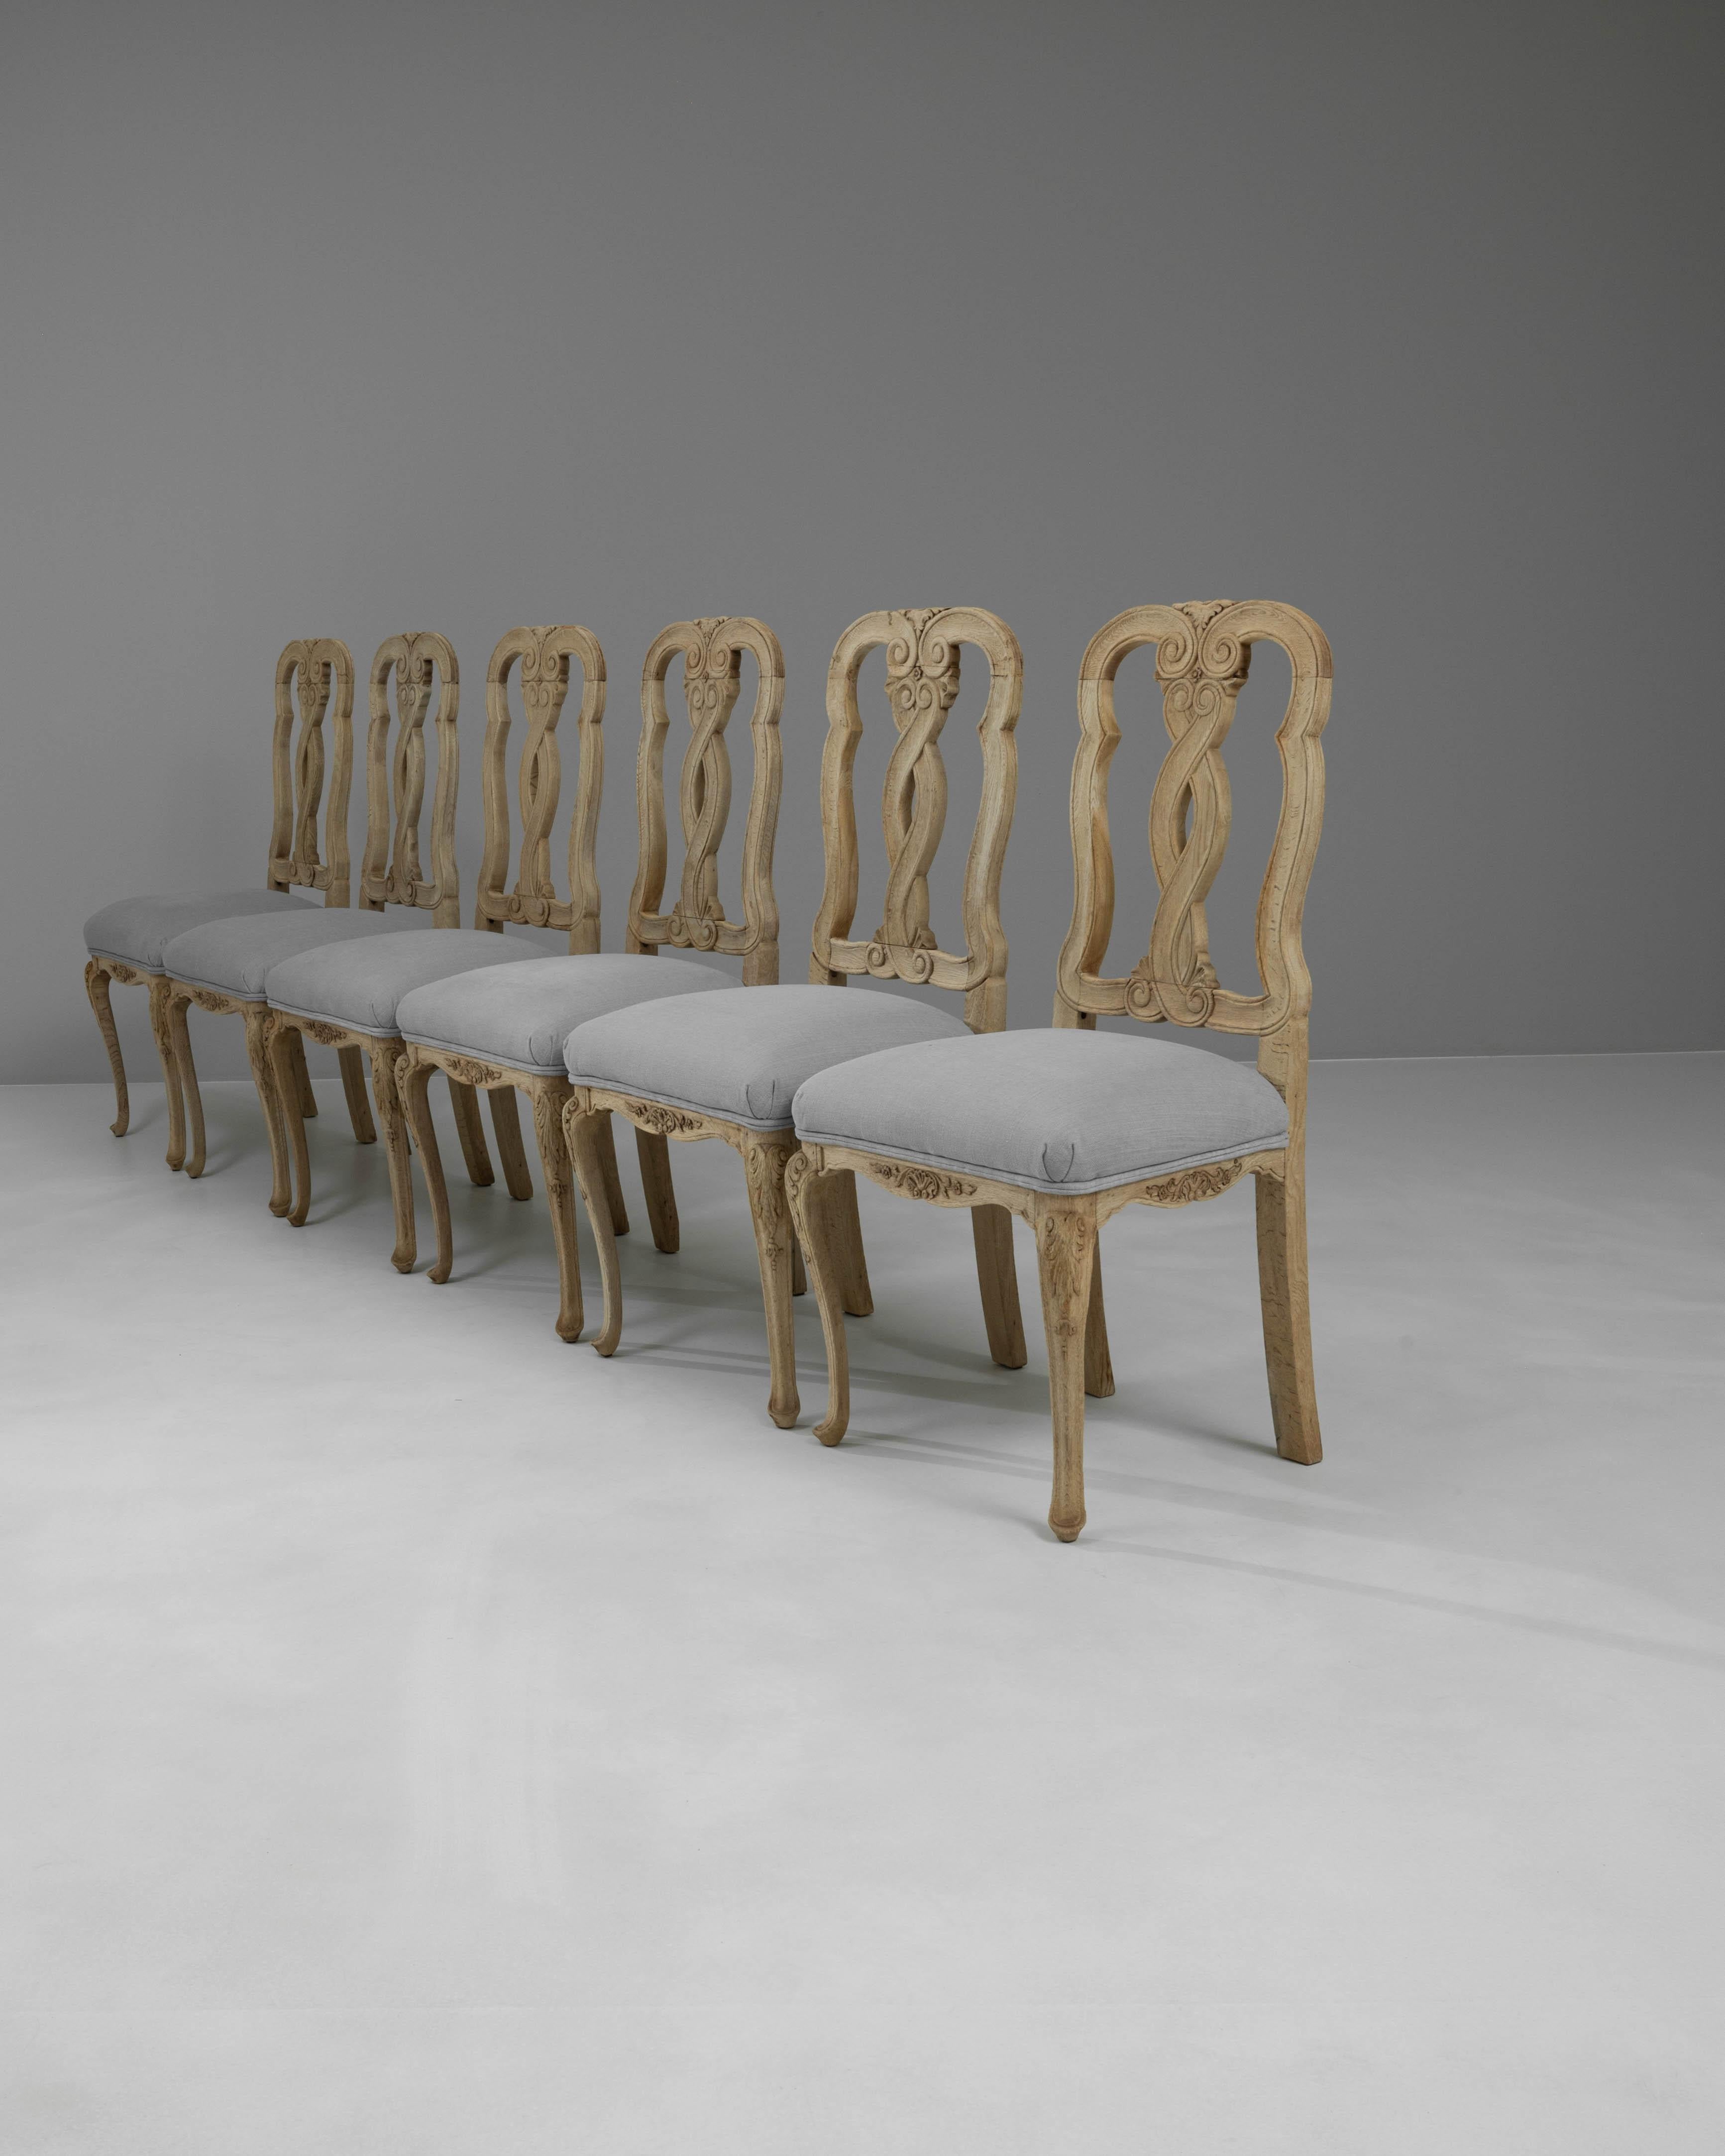 20th Century French Bleached Oak Dining Chairs With Upholstered Seats, Set of 6 For Sale 5